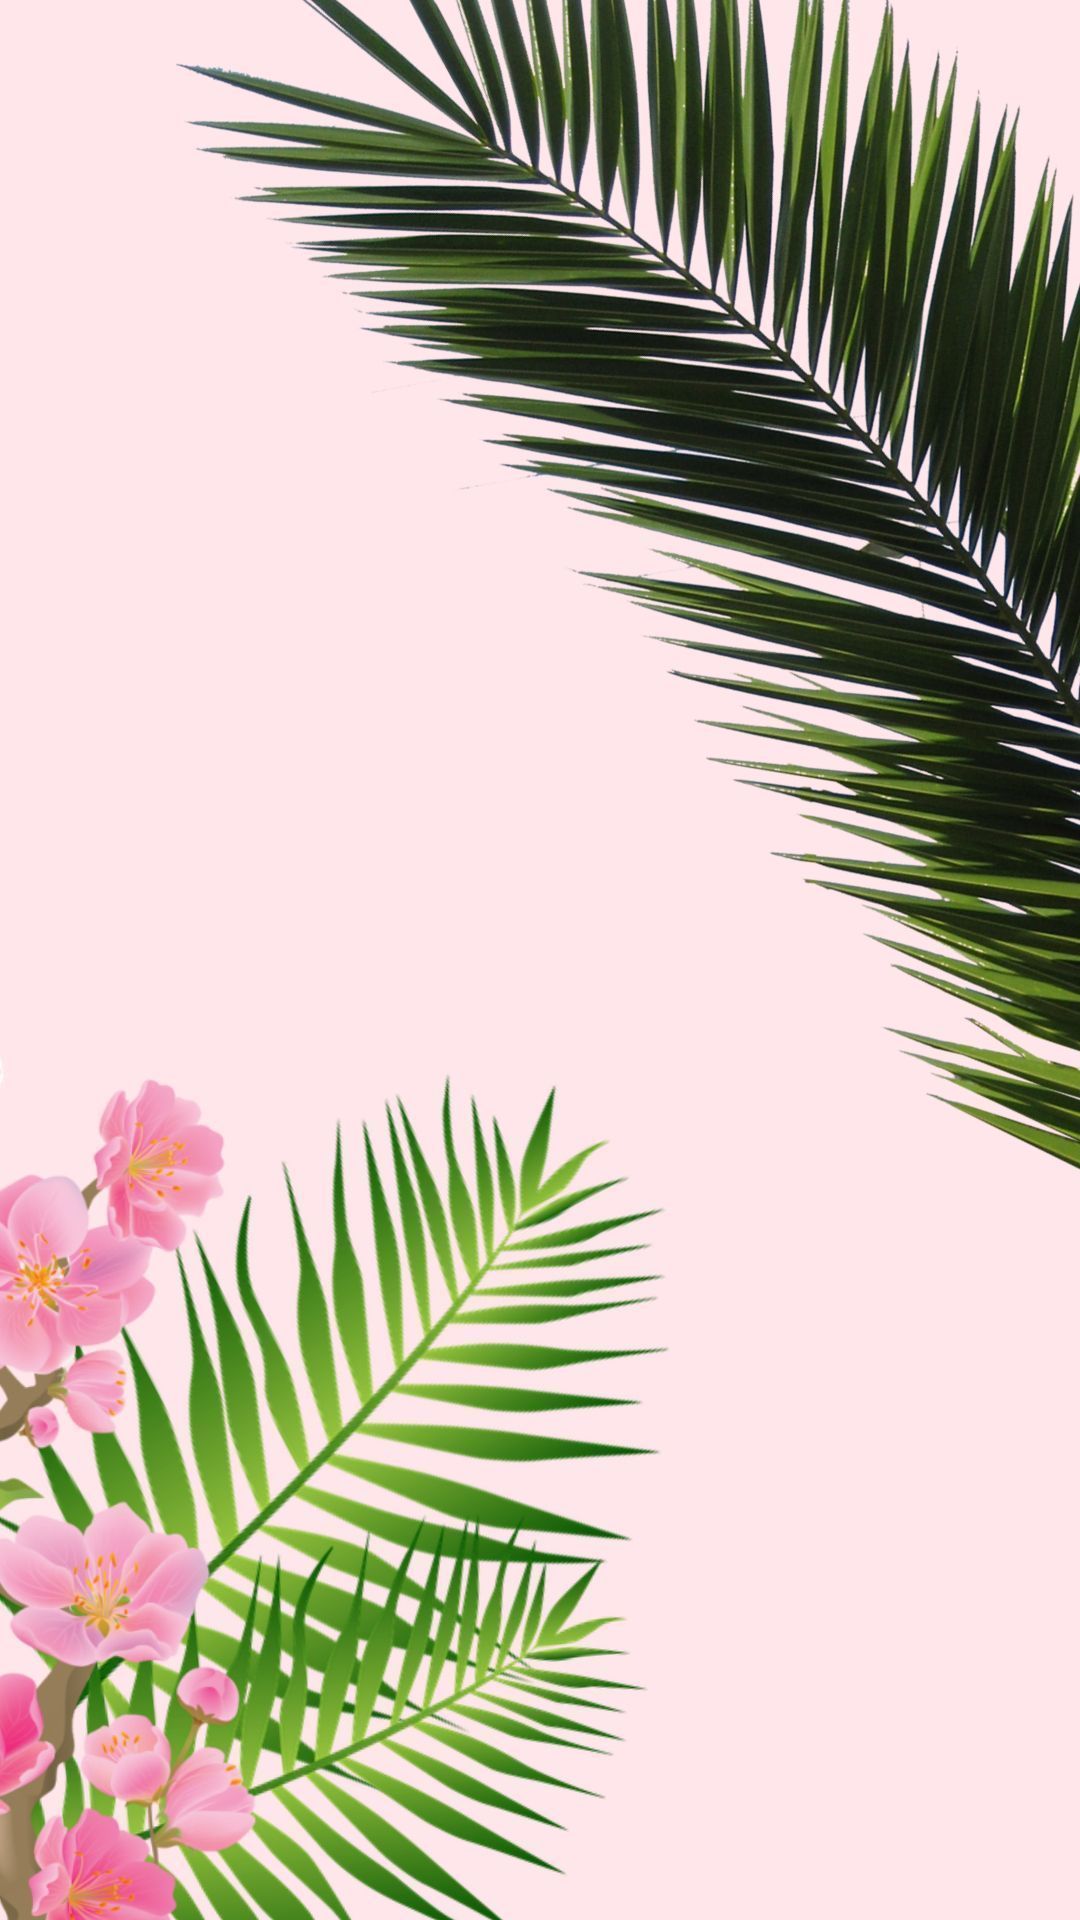 Pink flowers and palm leaves on a pink background - Tropical